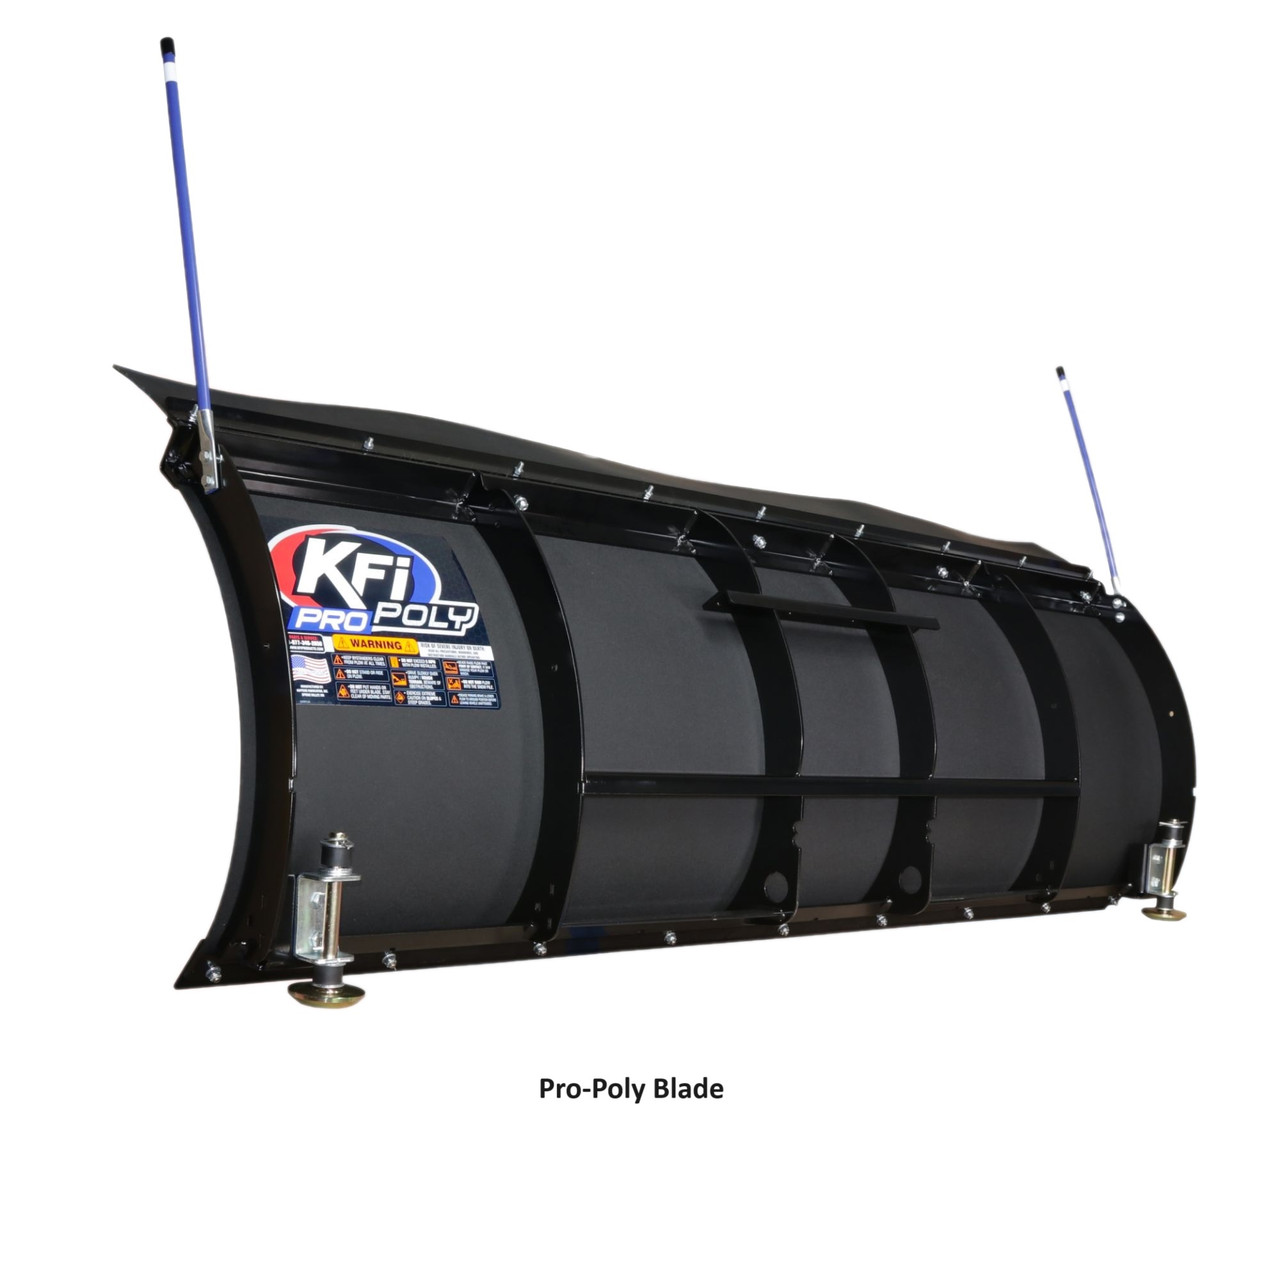 Polaris Ranger Complete Snow Plow System by KFI Products kfi-snwplw-2